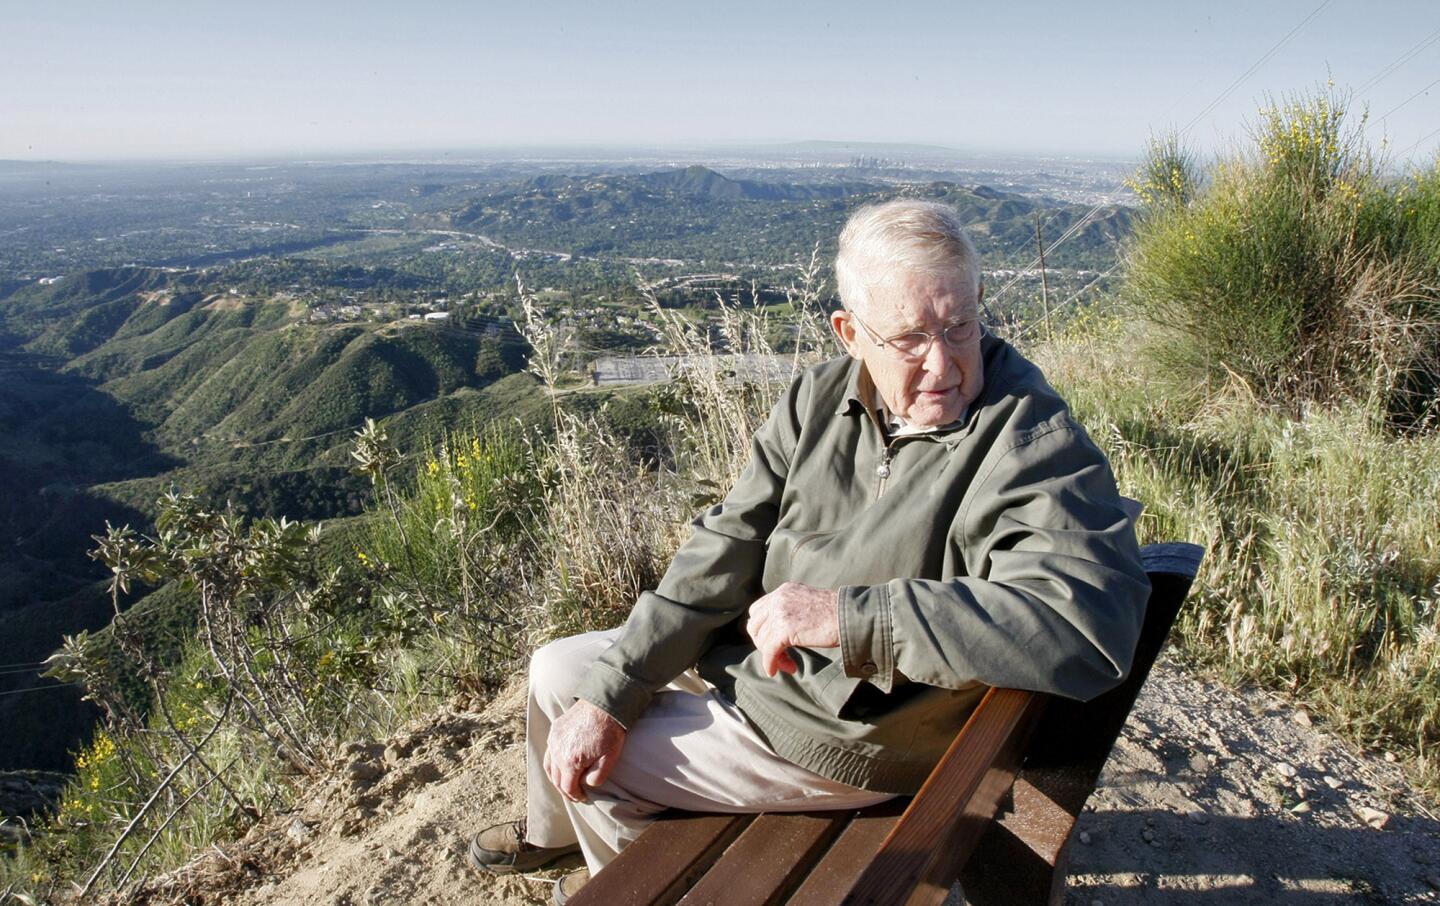 After a contemplative, steady pace up Mt. Lukens Truck Trail for about half an hour, Reg Green takes a break to get in the view of the L.A. Basin from the Angeles National Forest on Tuesday, April 9, 2013. The 84-yr. old La Canada Flintridge resident has been walking up this trail for about 9 years, 3-4 times per week. The bench was placed for him at the location by a local firefighter.